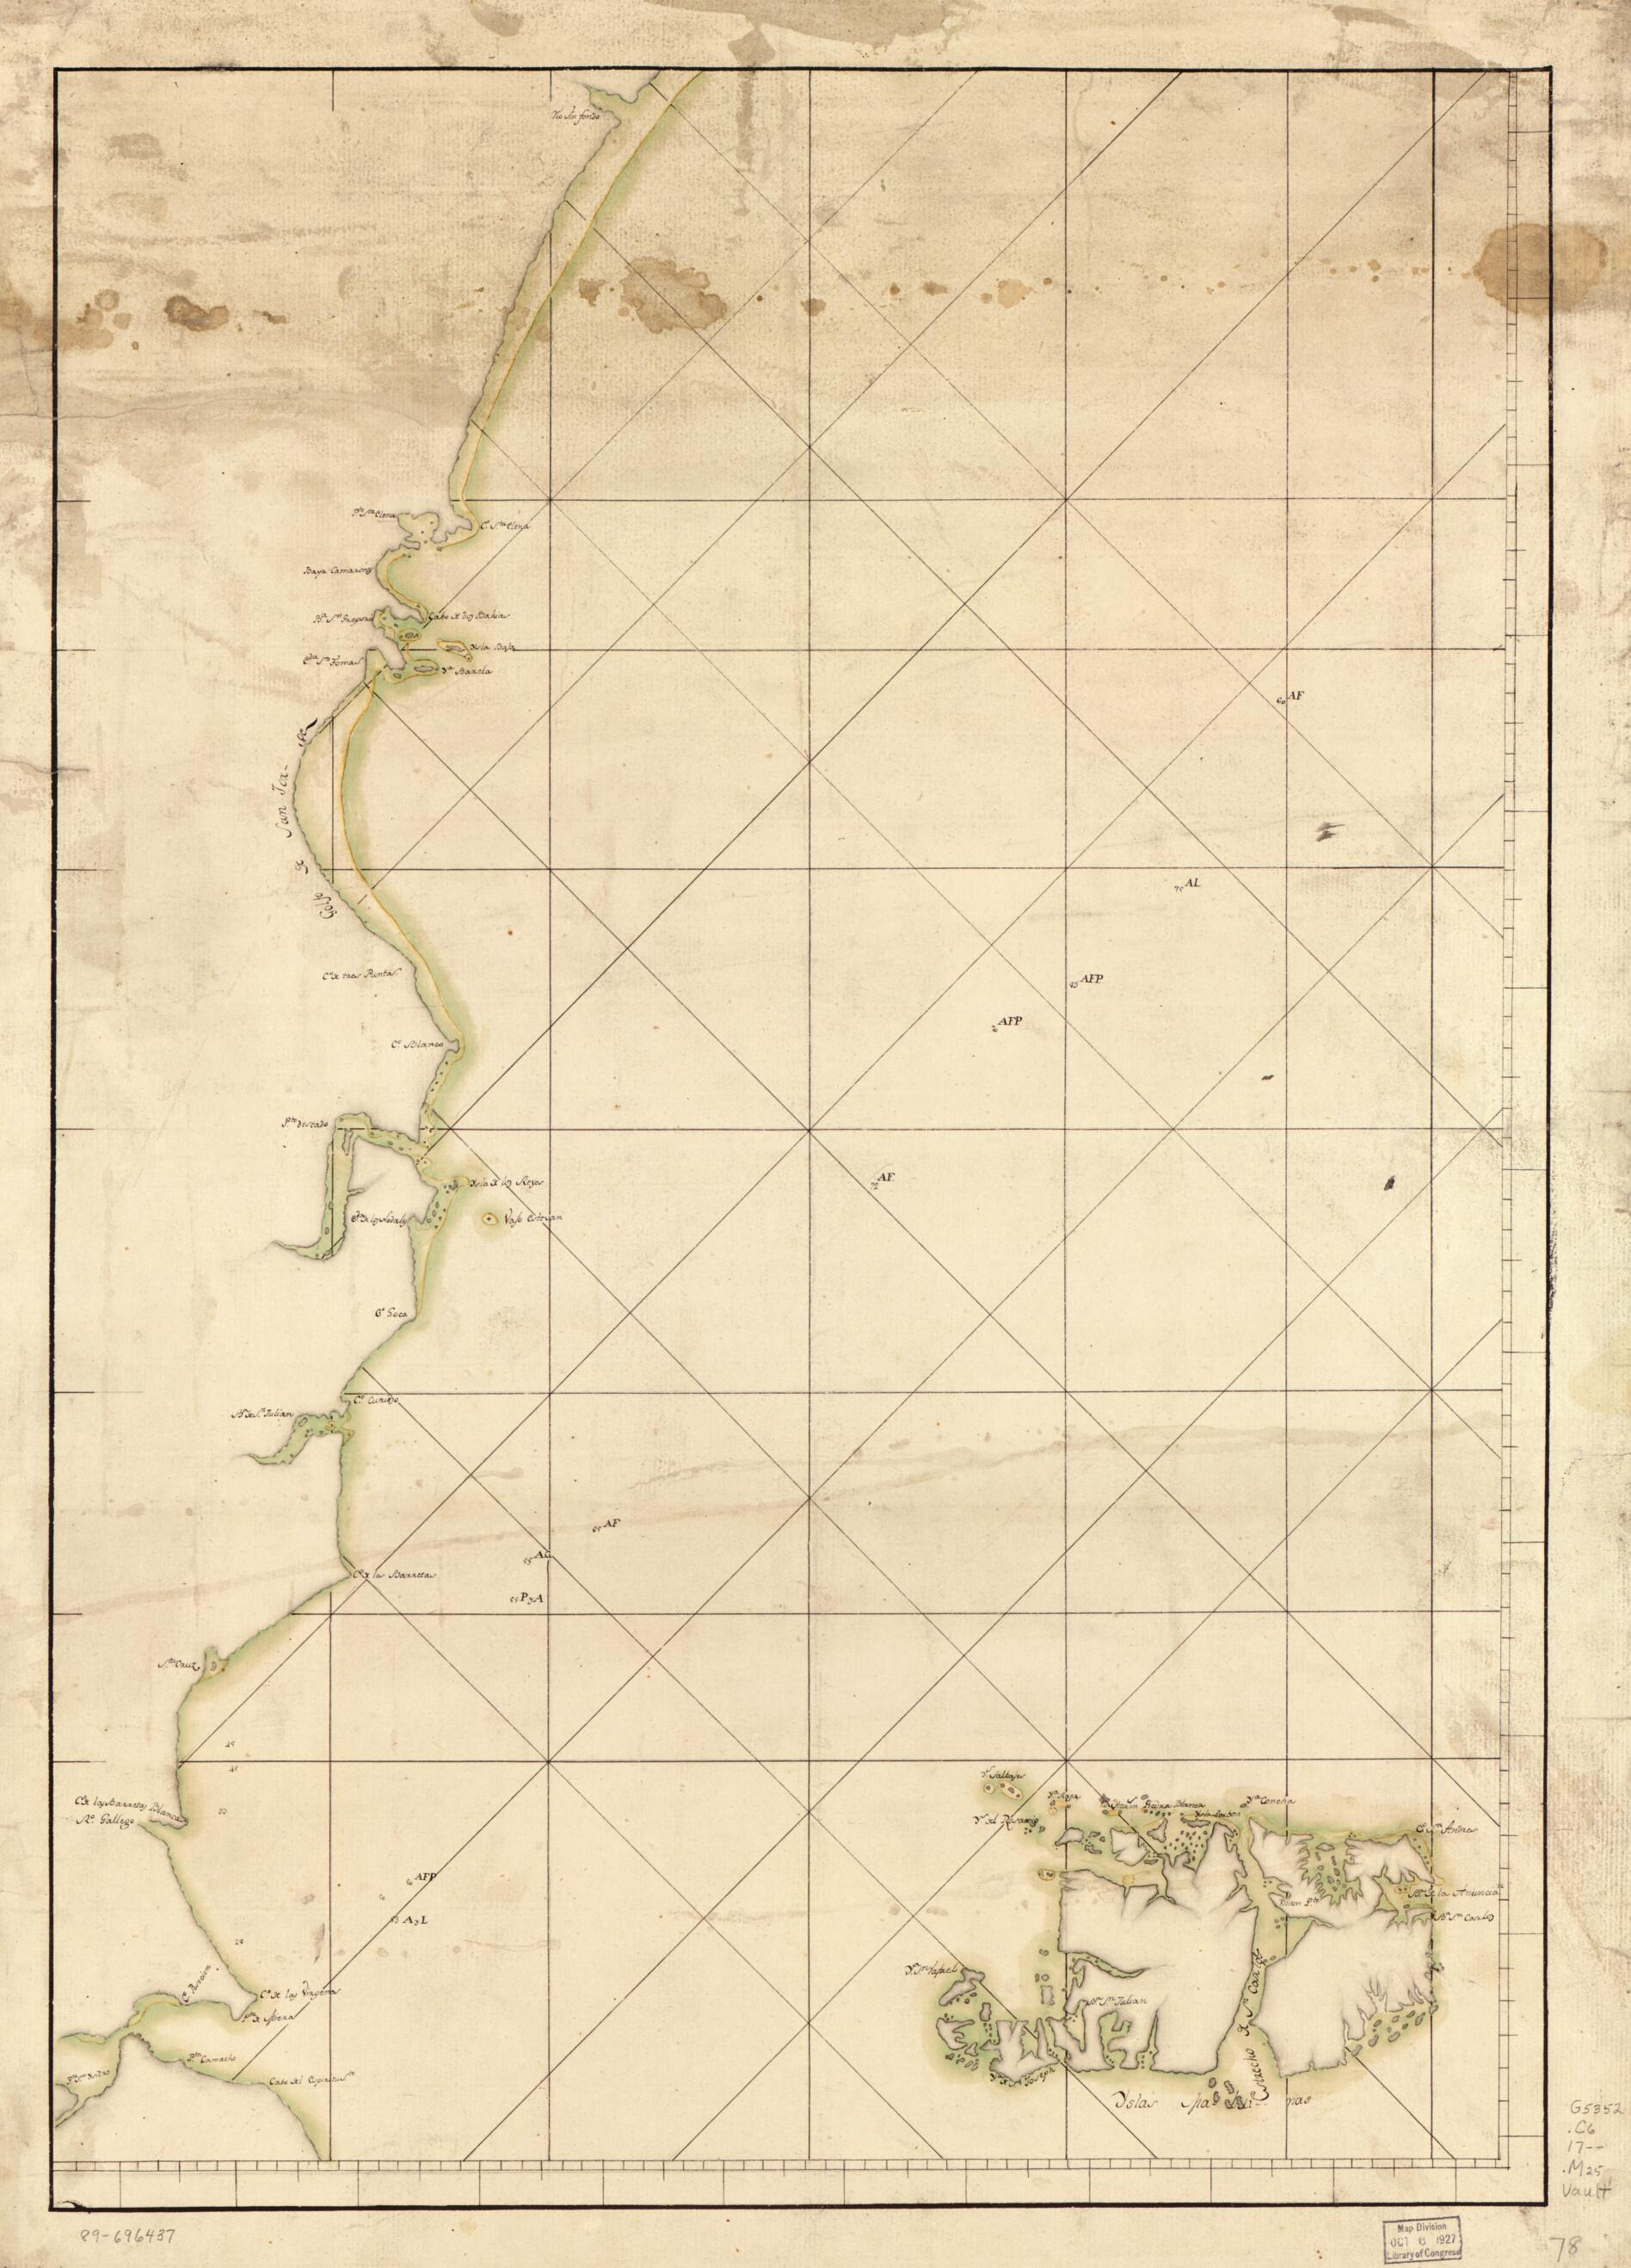 This old map of Map Showing Coast of Argentina from 42⁰S to 53⁰S (Chubut River to Strait of Magellan Including Falkland Islands) from 1700 was created by  in 1700